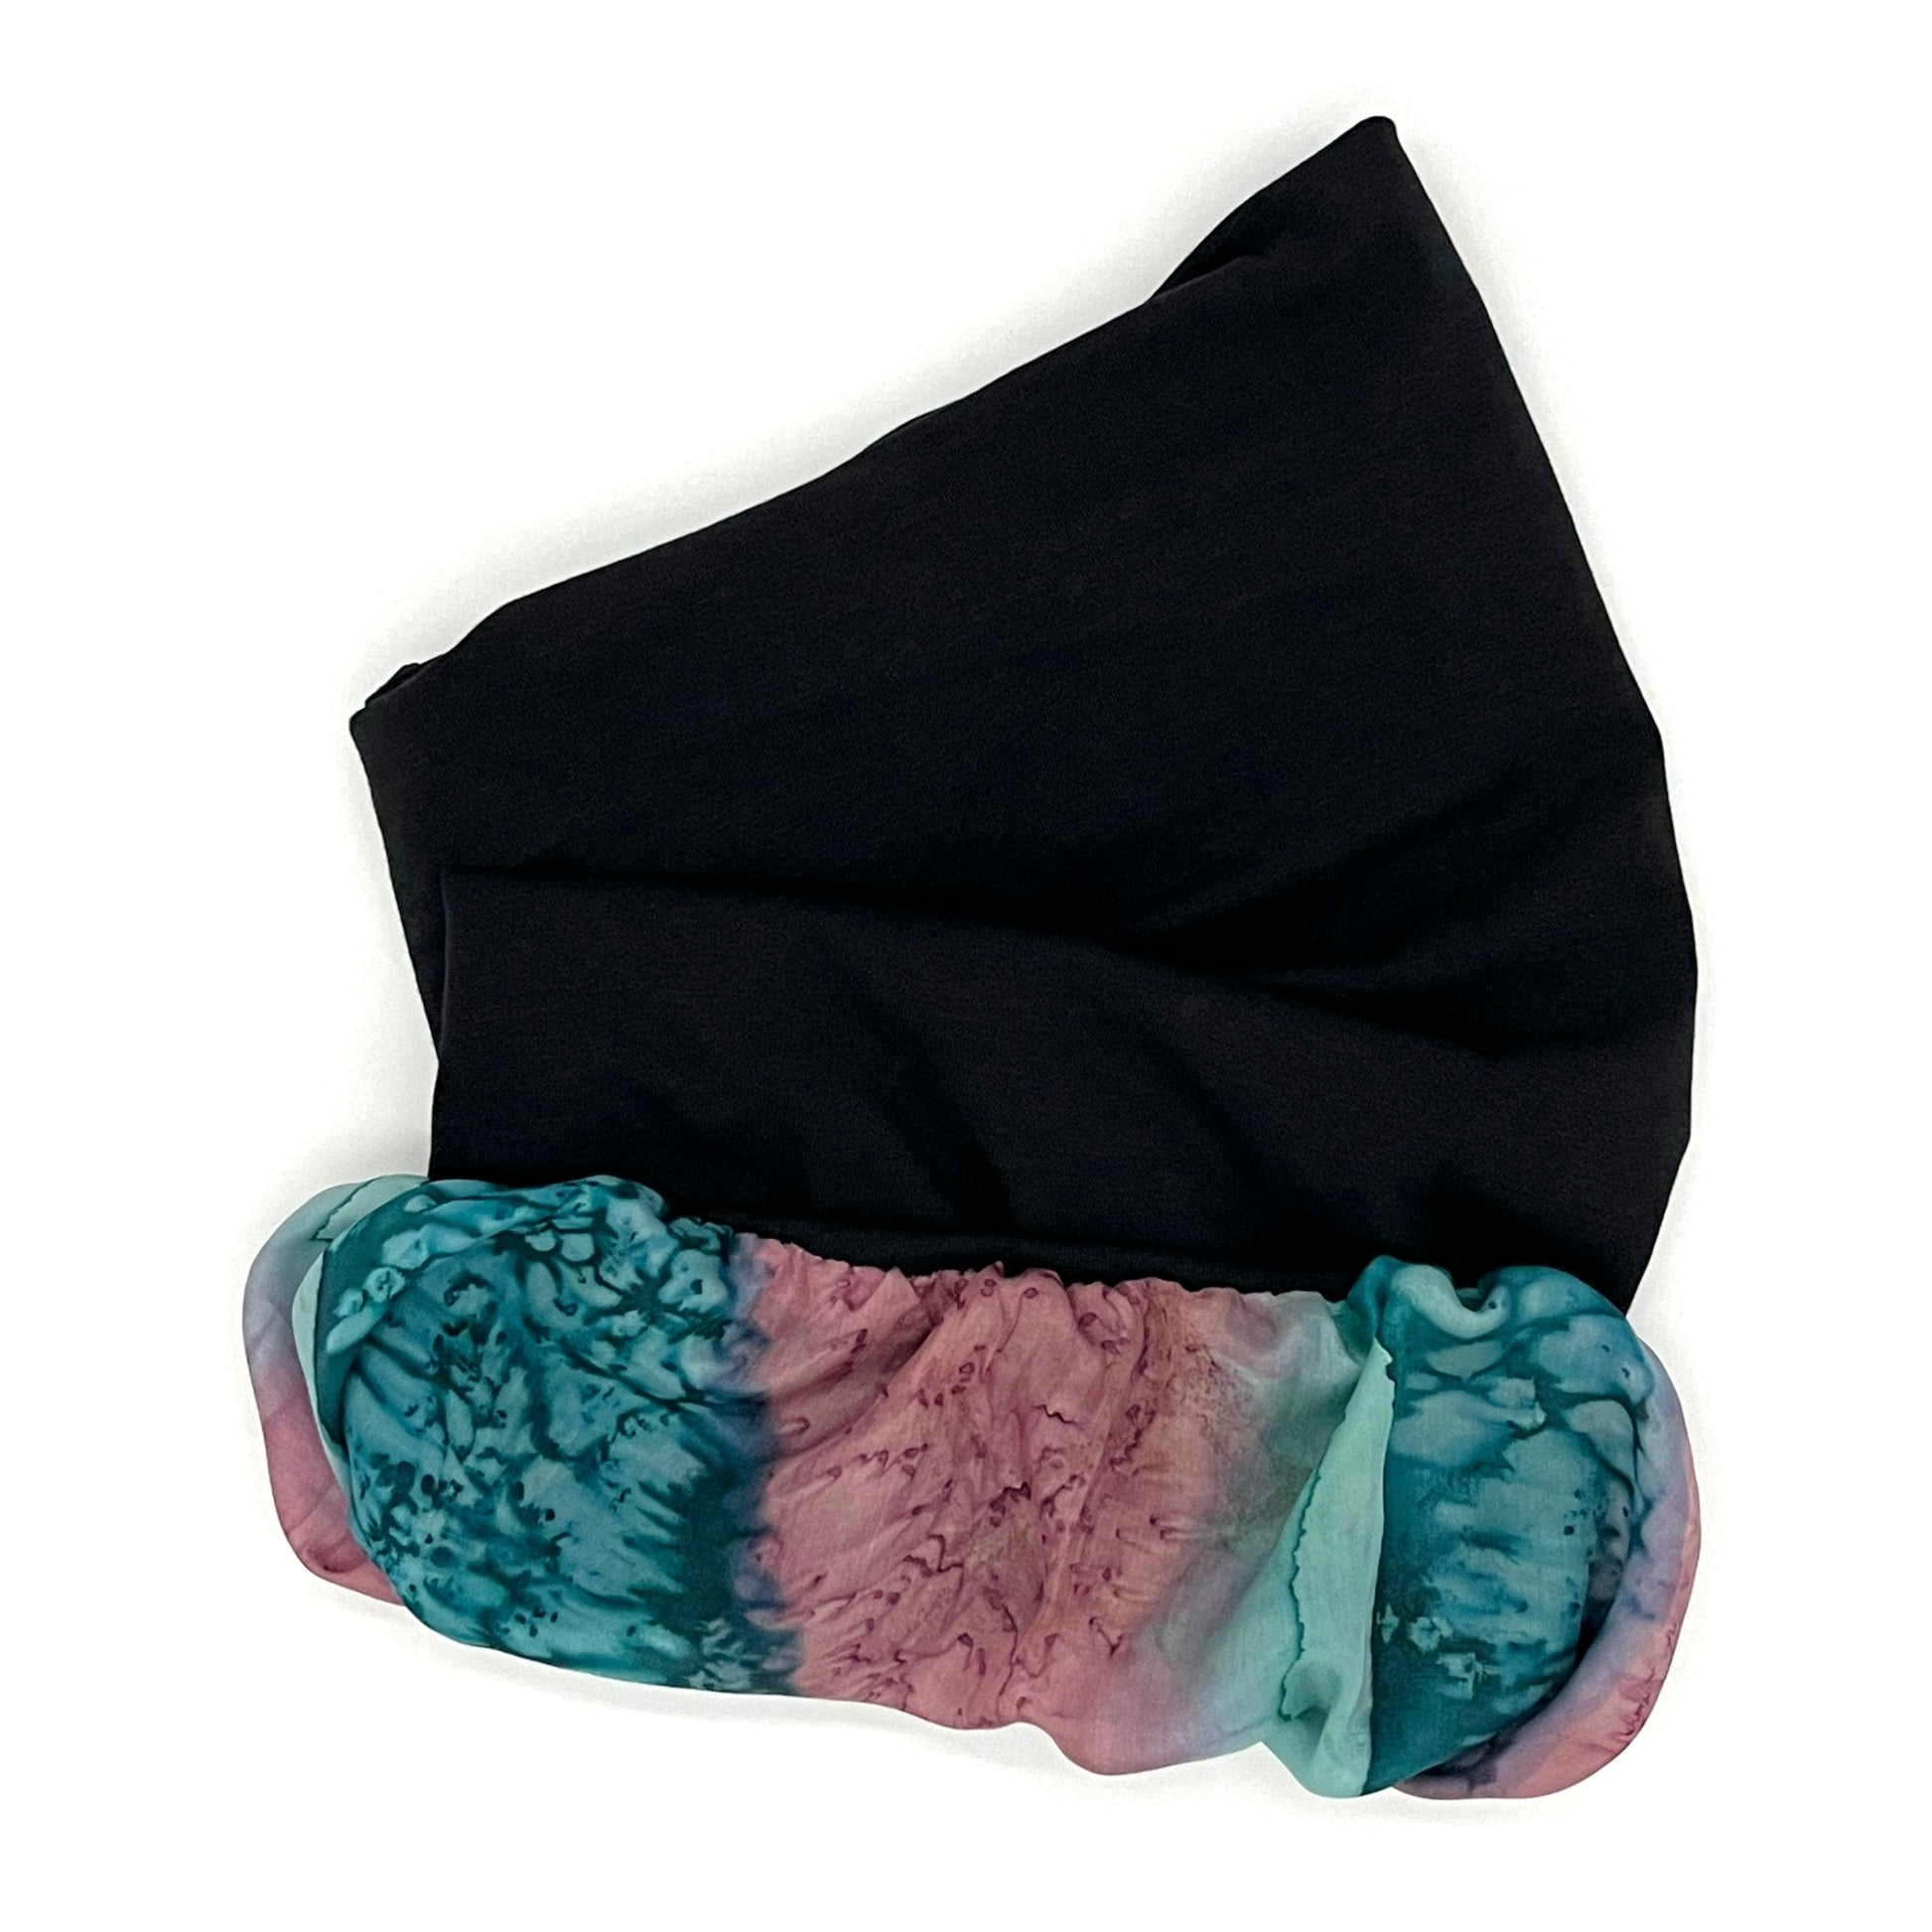 Black, green and red silk lined bamboo hair wrap SilkGenie